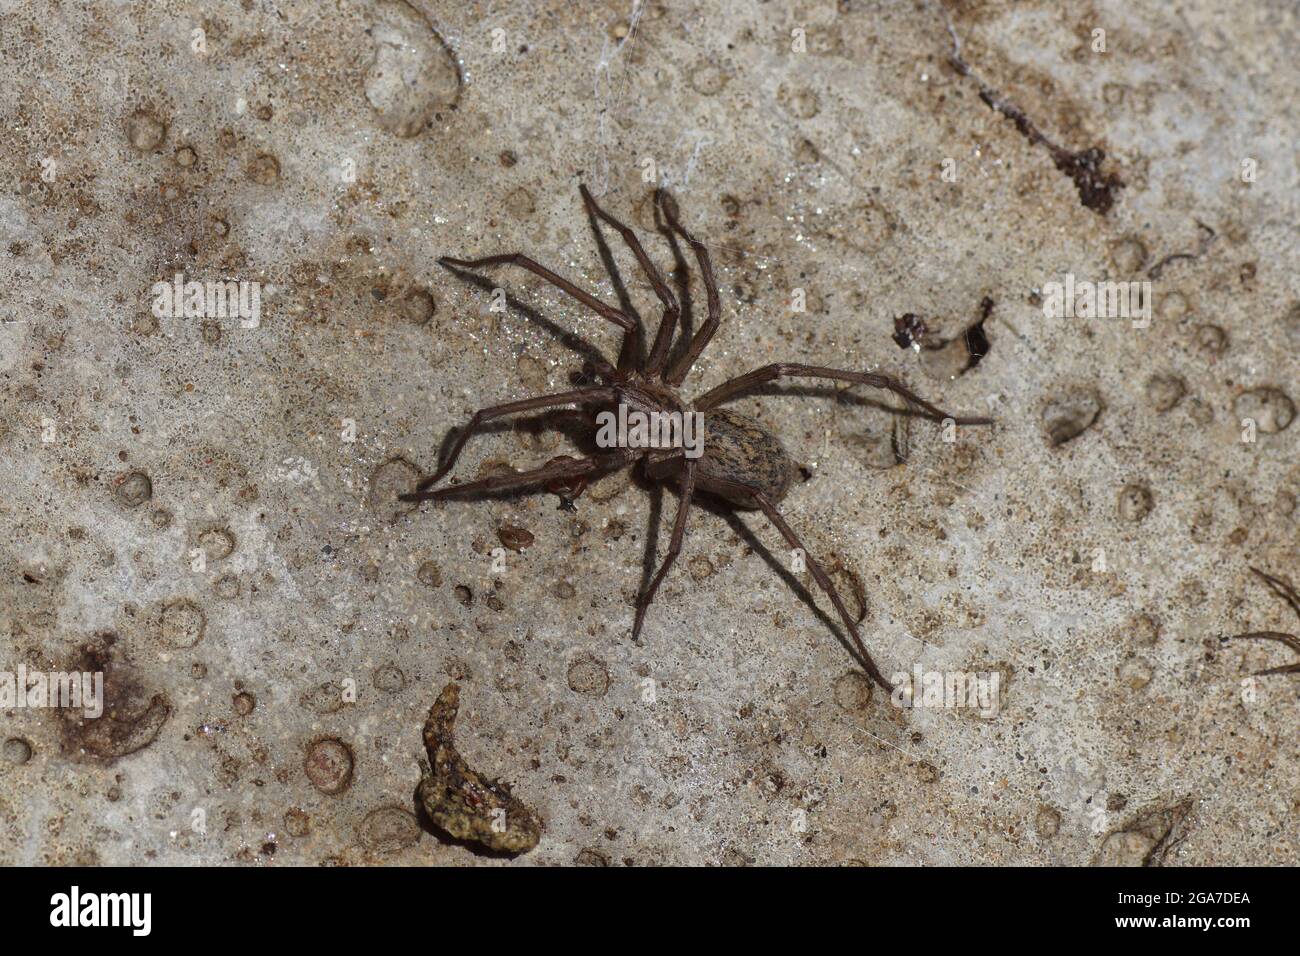 giant house spider (Eratigena atrica), family Agelenidae on a rough concrete surface. Summer, July, Netherlands Stock Photo